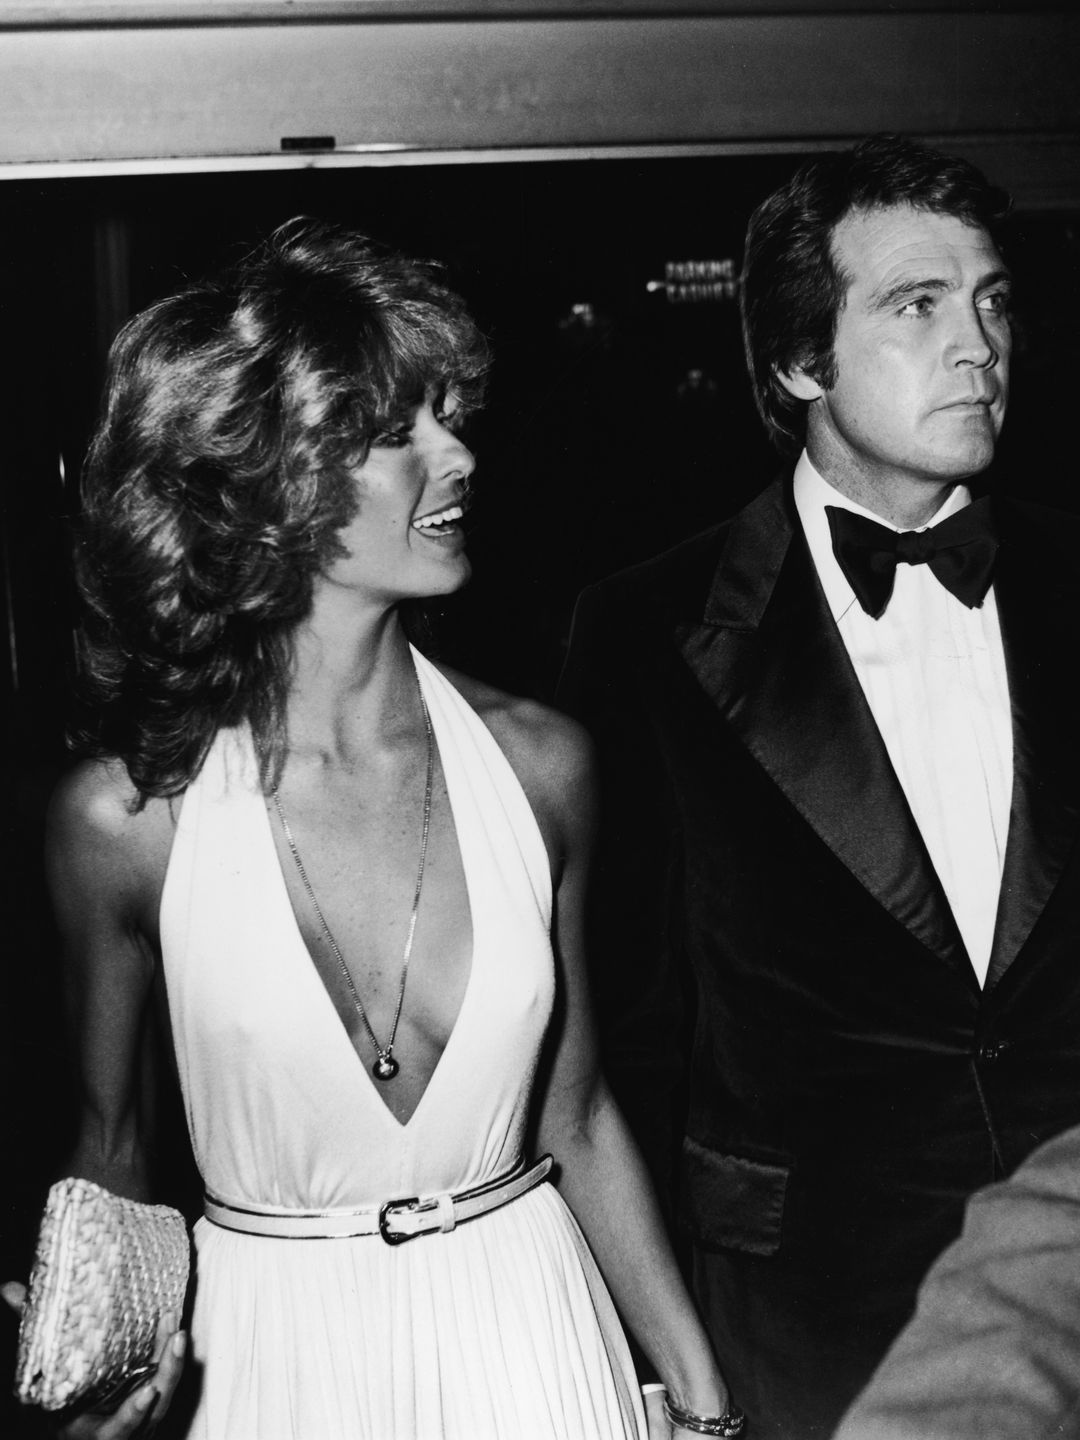 Farrah Fawcett Majors and Lee Majors arriving at a gala event in honour of Prince Charles